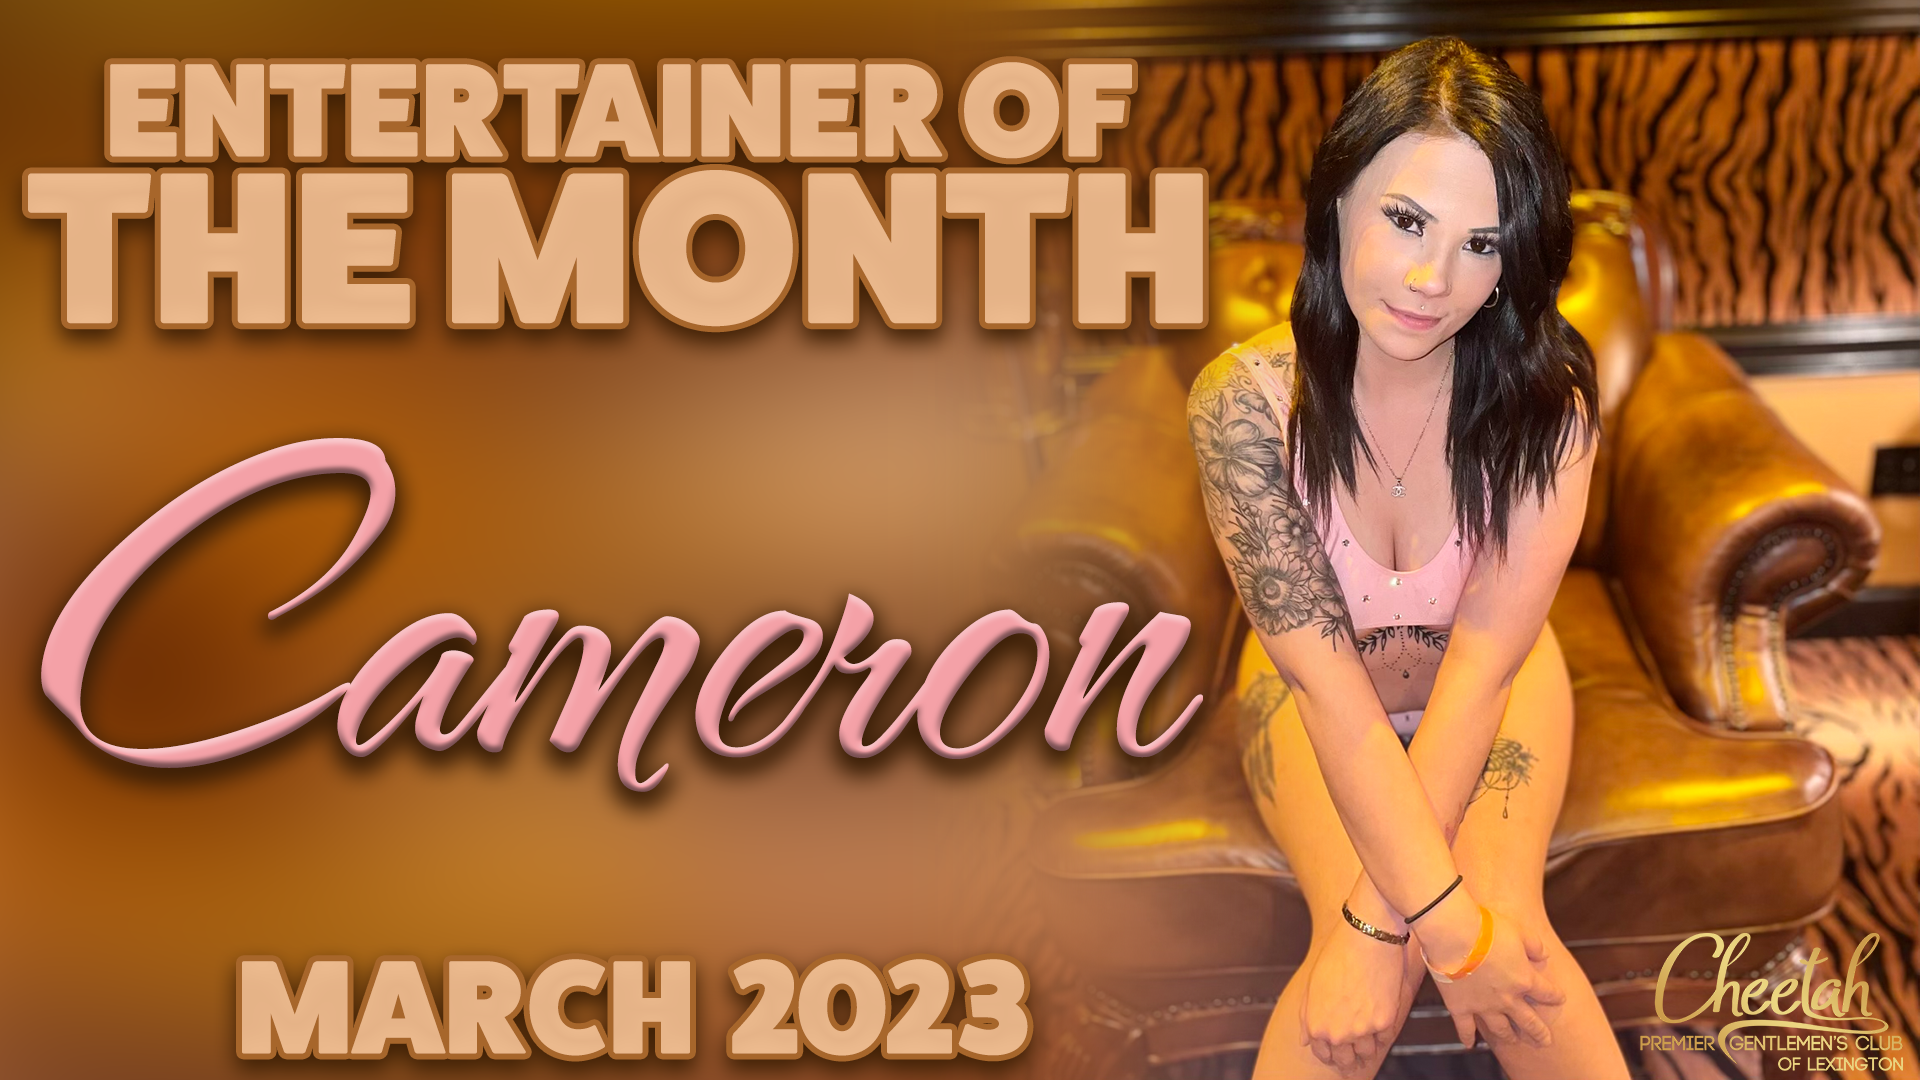 March 2023 Entertainer of the Month